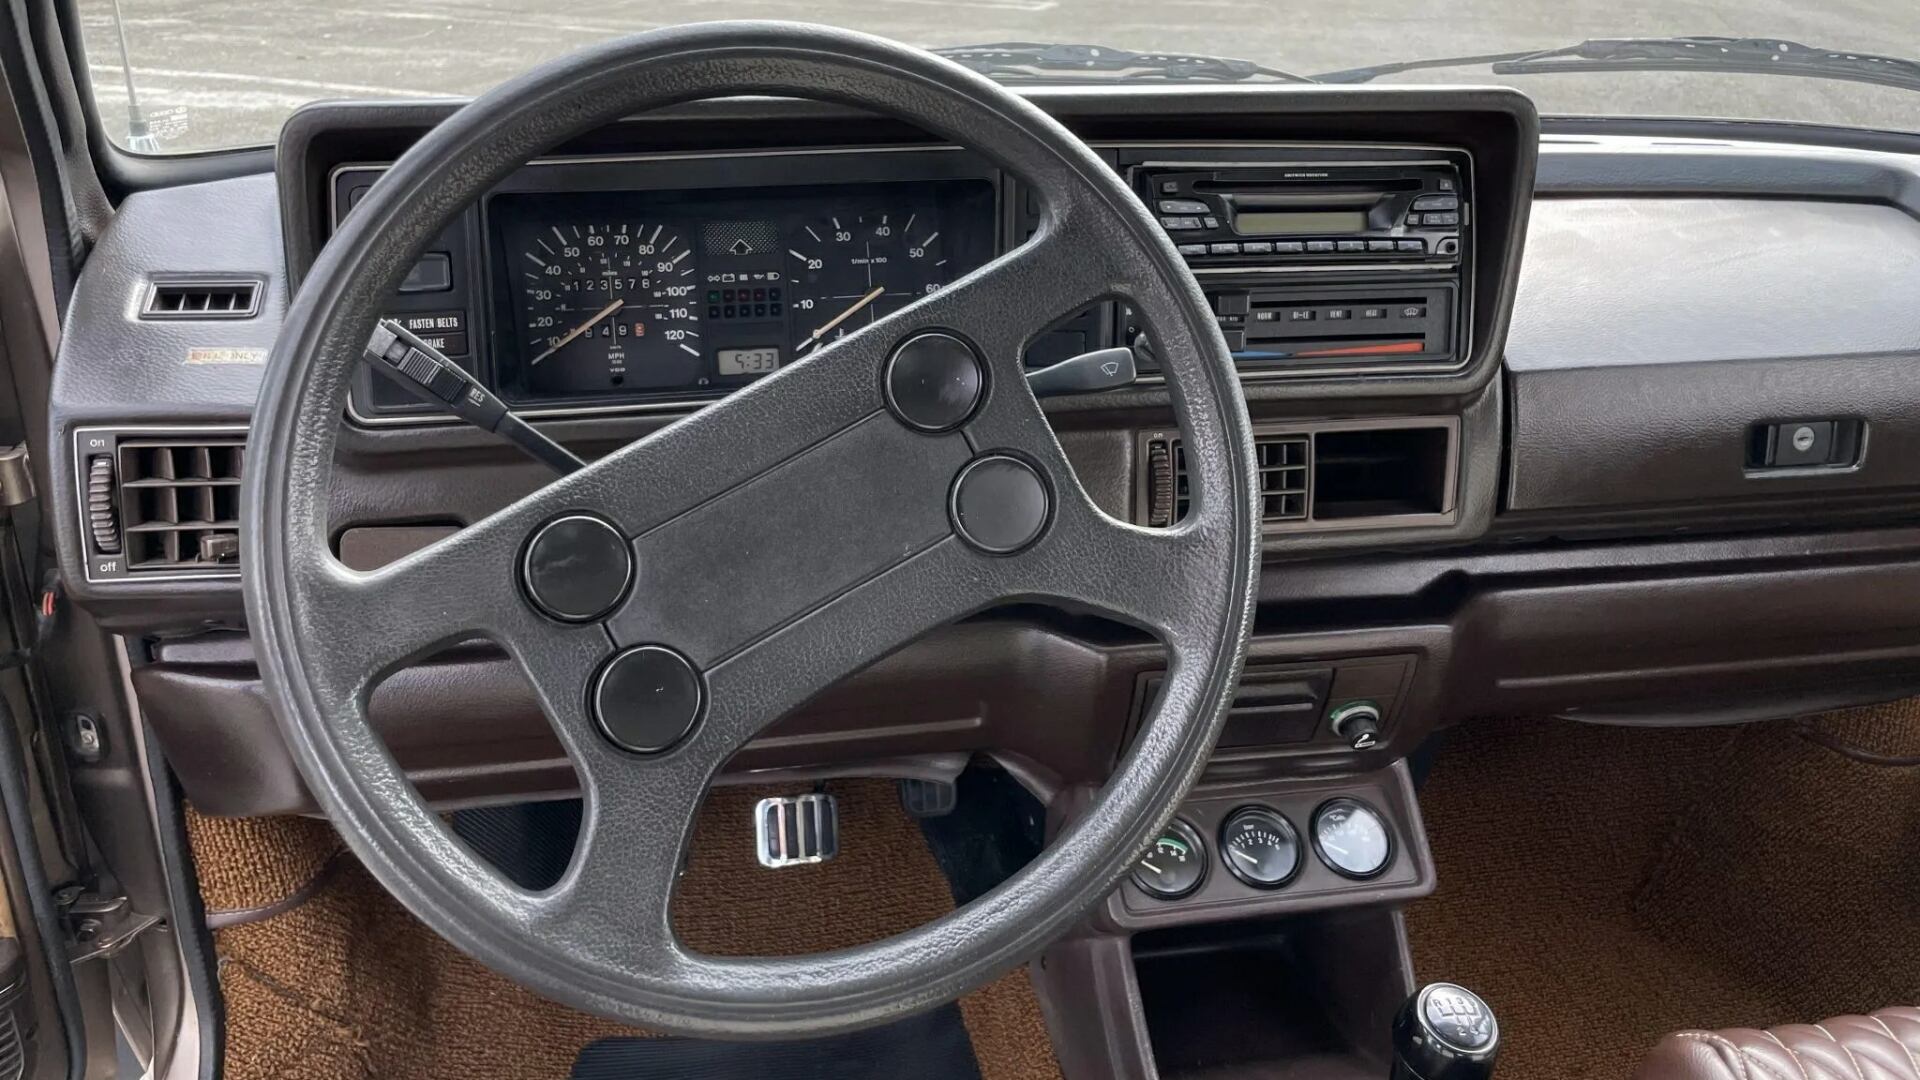 The Steering And Dashboard Of The 1984 VW Rabbit Convertible (Credits Bring A Trailer)